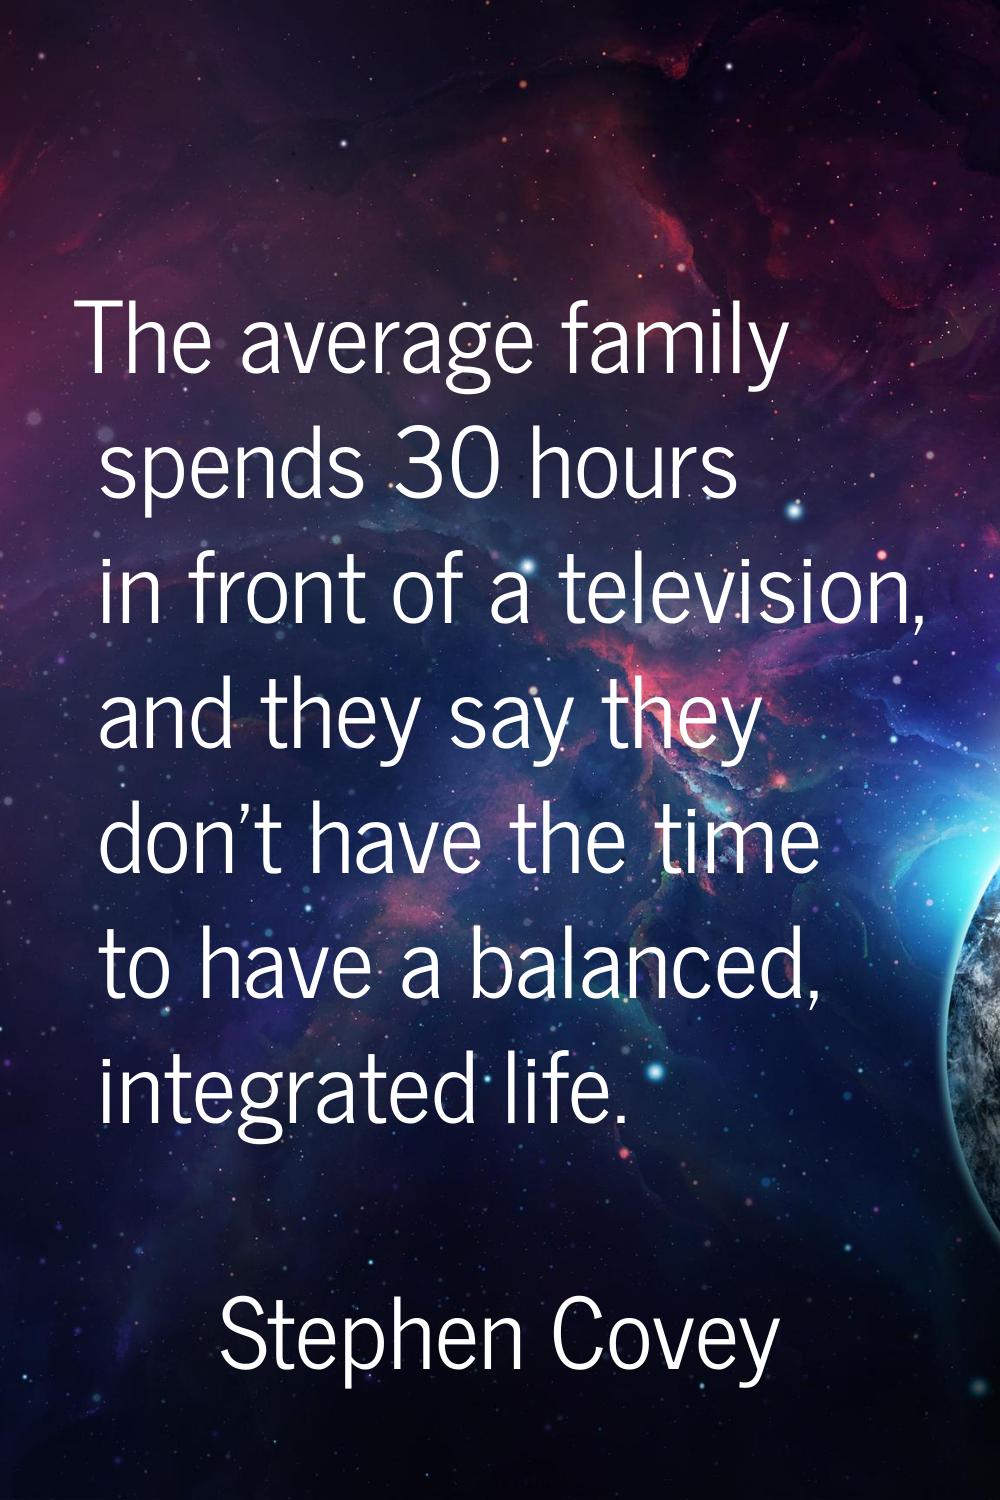 The average family spends 30 hours in front of a television, and they say they don't have the time 